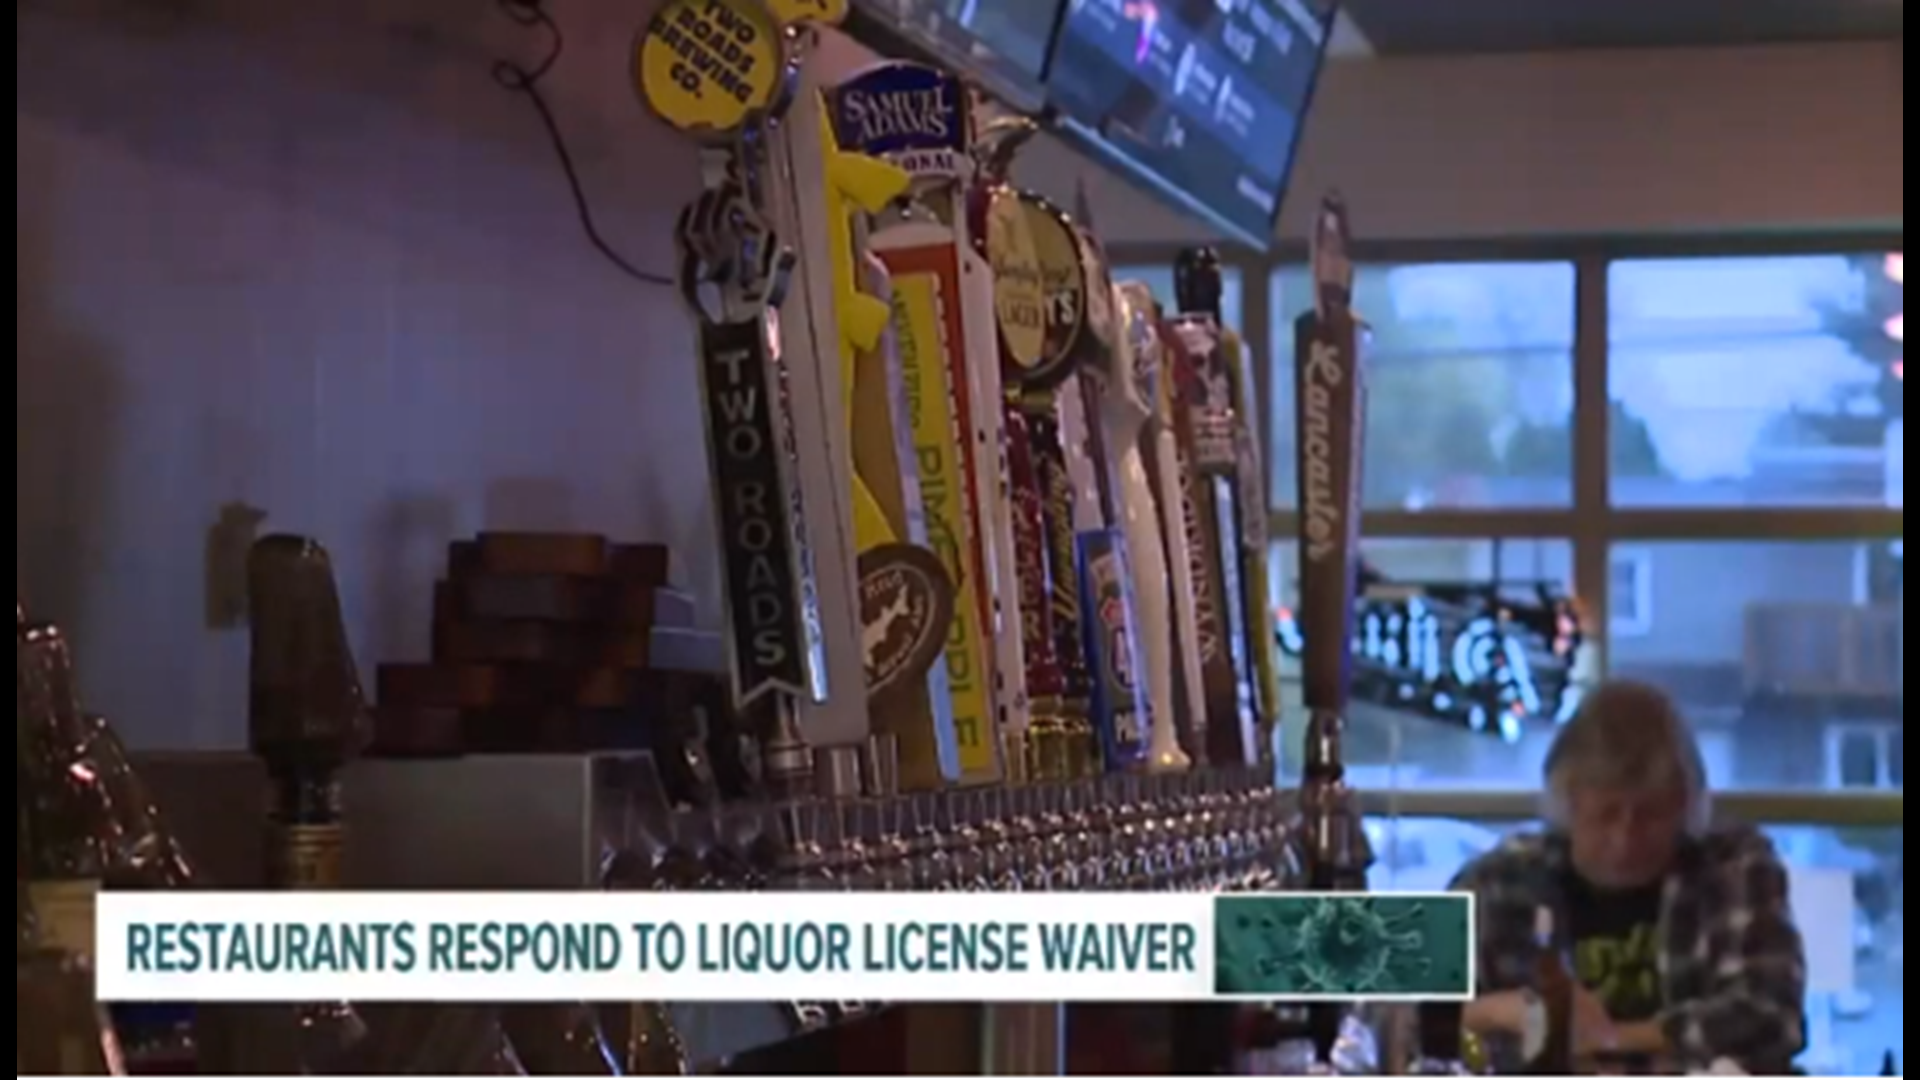 The restaurant industry is calling on state government to do more to help struggling restaurants, despite plans to waive liquor license fees through 2021.